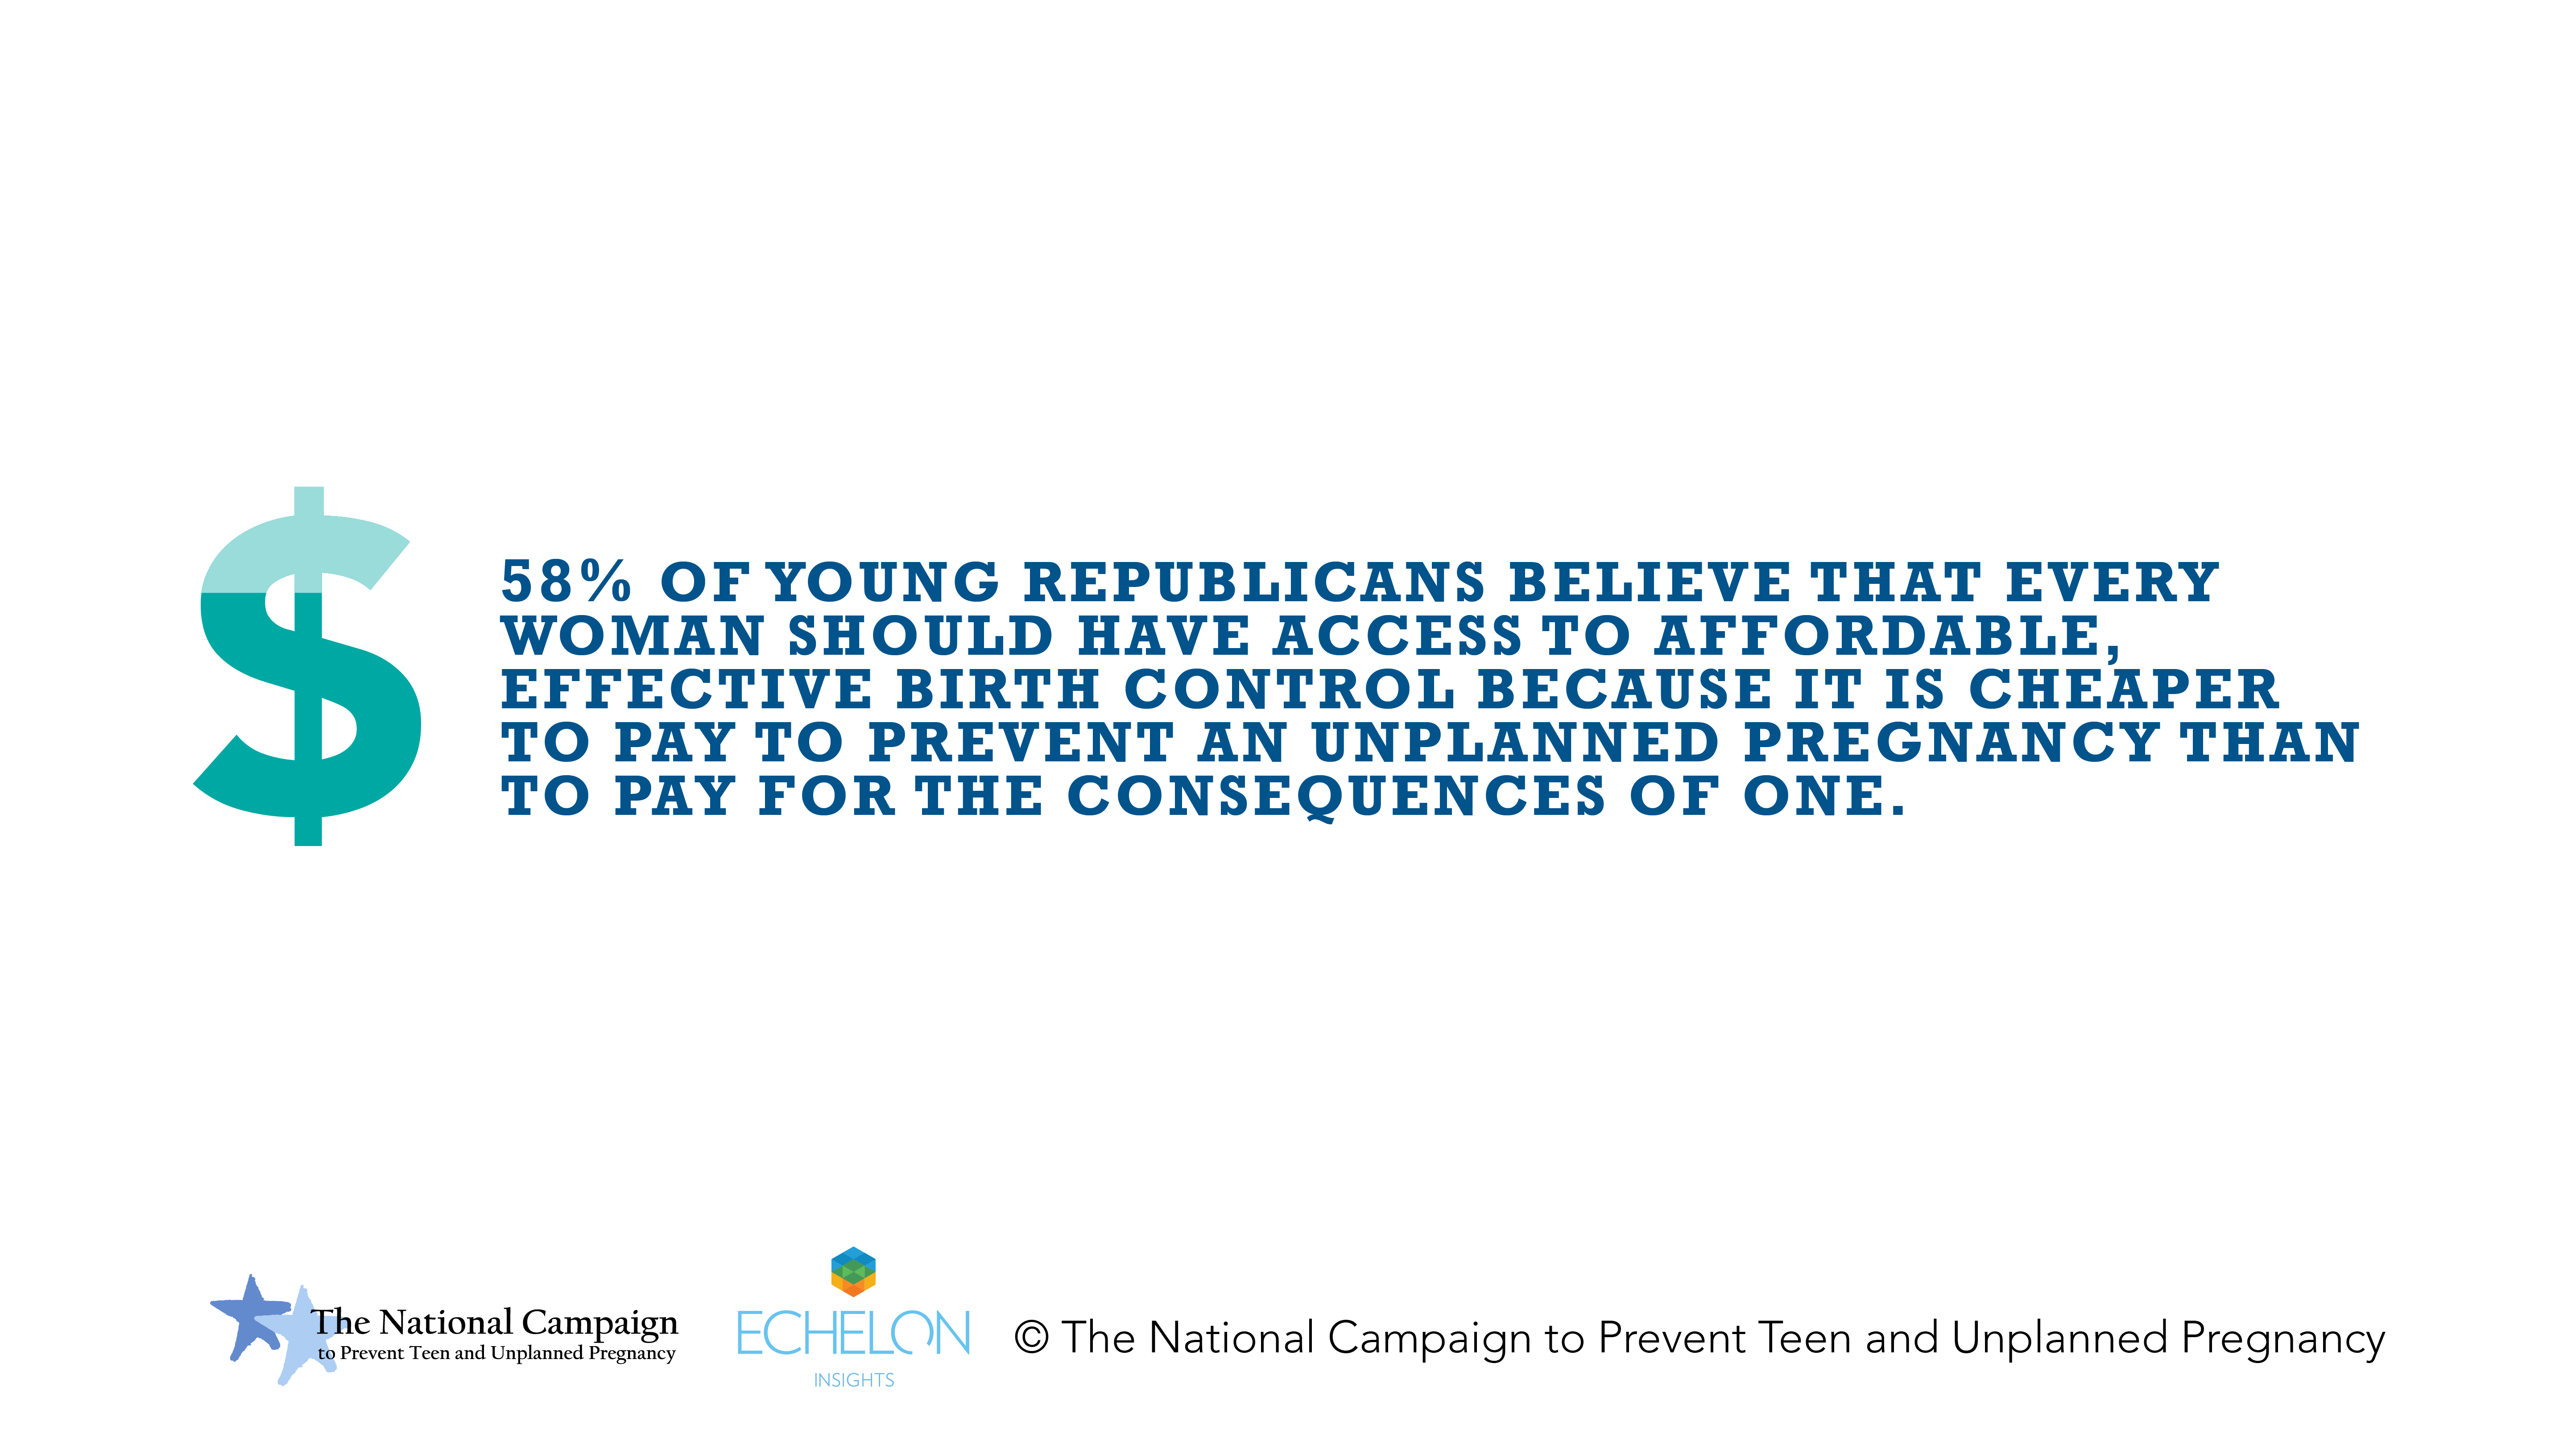 Survey Says: Young Republicans and Birth Control (March 2015)